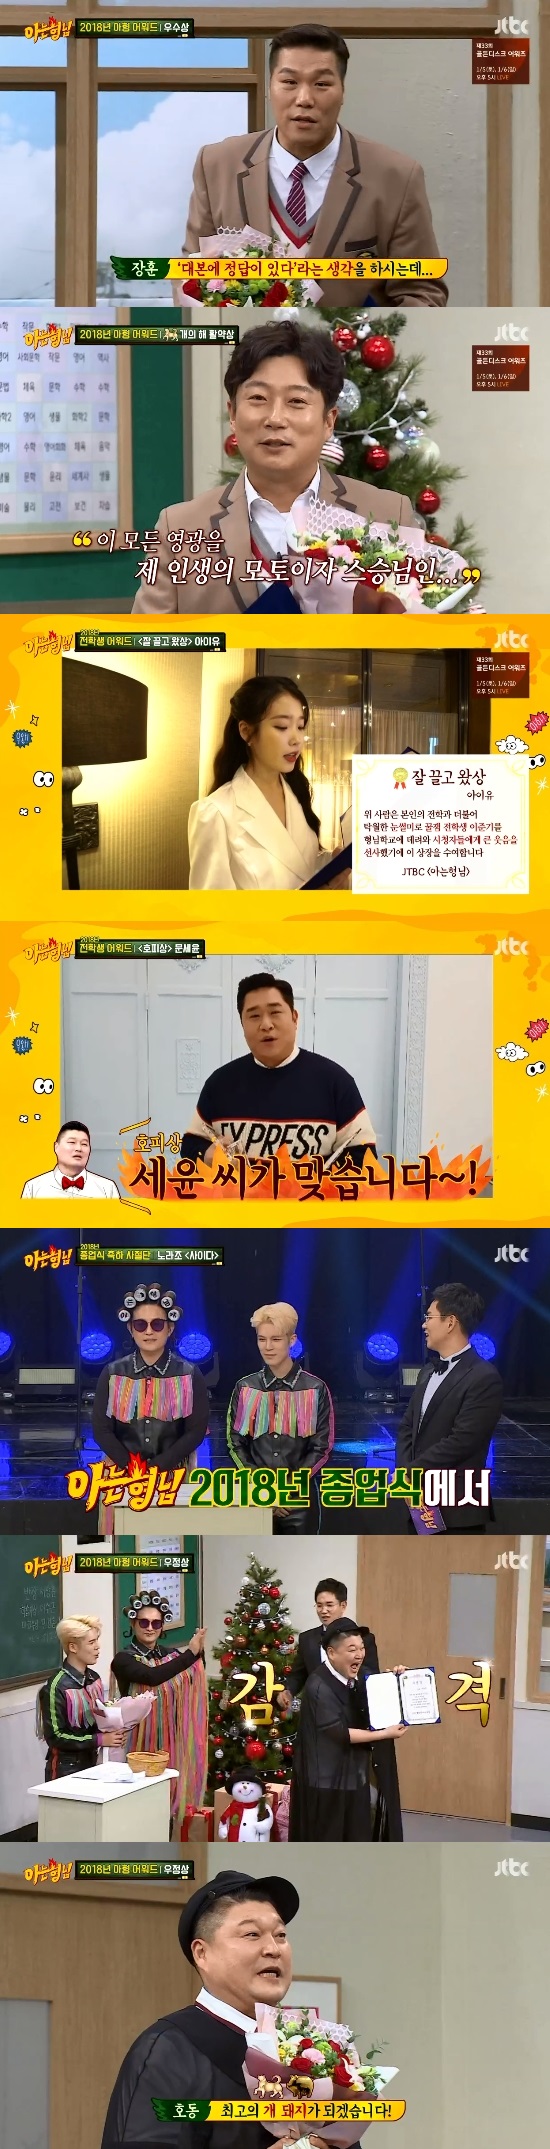 Kang Ho-dong has been recognized as the best entertainer.JTBC Knowing Bros, which was broadcast on the 29th, was decorated with the closing ceremony of my brothers school 2018.First of all, he announced the best scenes of 2018, which he selected his own members of Knowing BrosKim Young-chul cited the sequenced scene, and Seo Jang-hoon recalled the stunt parade that Lee Joon-gi showed when he appeared.In particular, Seo Jang-hoon had a private meeting with Lee Joon-gi after the broadcast.Kim Hee-chul said, Originally, Seo Jang-hoon does not eat with former students, and he called Lee Joon-gi and bought them delicious.Seo Jang-hoon also helped I kept my promise because I wanted to have a drink first.Kim Hee-chul chose the National Song Proud corner of the Celeb Five as a famous scene.Kim Hee-chul said: Its a scene you can make because its a Celeb Five and Kang Ho-dong, Kang Ho-dong was so deliciously welcomed.I could see why Kang Ho-dong is the third place MC that people love. Lee Sang-min cited the scene where IU chose him because IU said he wanted to listen to Lee Sang-mins music at the time.Lee Sang-min said, I was impressed that I wanted my junior to play music again, so I am a lifetime master.I was afraid of Hahi again, and when I forgot for a while and tried to do it again, I was worried more than confident, but the IU changed that worry.I am receiving a beat, he said, preparing to make a musical comeback.Min Kyung Hoon cited the airport close coverage scene, and Lee Soo-geun cited the new concept broadcaster scene.Especially in this process, the new word Sebangbangsae, which combines both wrestling and broadcasting, was born, and once again gave a big smile.Finally, Kang Ho-dong chose the wrestling confrontation between Seo Jang-hoon and Lee Soo-geun as a master scene.Lee Soo-geun won the final in the mens finals and made a big impression and completed the drama without a script.Viewers selected Kim Shin-youngs Episode, Park Jun-hyungs sinus syndrome escape, Kim Dong-hyuns advantage, fat counterattack, and Haha & Nosahyuns Seo Jang-hoon mall.Among them, a celebratory mission appeared for the closing ceremony of Knowing Bros The identity of the first protagonist was the vocalist.The vocal members were Lee Soo-geun, Lee Sang-min, and Kim Young-chul, who even called No Na-yong to the chords and laughed.Next, the 2018 Knowing Bros Award ceremony was held.Kim Hee-chul, who won the Best Actor award for Min Kyung Hoon and played for Kim Hee-mi, won the Best Actress Award.Kim Hee-chul said, Every time I played Kim Hee-mis character, my fans cheered me very much. I will be Kim Hee-mi who will continue to breathe with the members.Also, Lee Sang-min won the prize, Kim Young-chul loved it, and Kang Ho-dong won the dog-salt award.The winner of the Excellence Prize was Seo Jang-hoon, and Lee Soo-geun was named as a prize winner.In addition to this, there is also time for transfer students to turn the ball. Uhm Jung-hwa received a hand-size award and the IU received a well-drawn award.I will honor my proud friend Lee Joon-gi, said IU. The main character, Hopisang (Hodong Damage 101), who was the most intense division, became Moon Se-yoon.At this time, NORAZO appeared as the first singer and set up the stage of Cida. NORAZO showed pride in saying I have two schedules and awarded the best Woo Jung selected by my brothers.And the honor of the friendship was held by Kang Ho-dong, who was impressed by the fact that he was the eldest brother and had his brothers excessive drip.Kang Ho-dong said, In 2019, I will be the best dog and pig to give a smile to viewers.Photo: JTBC